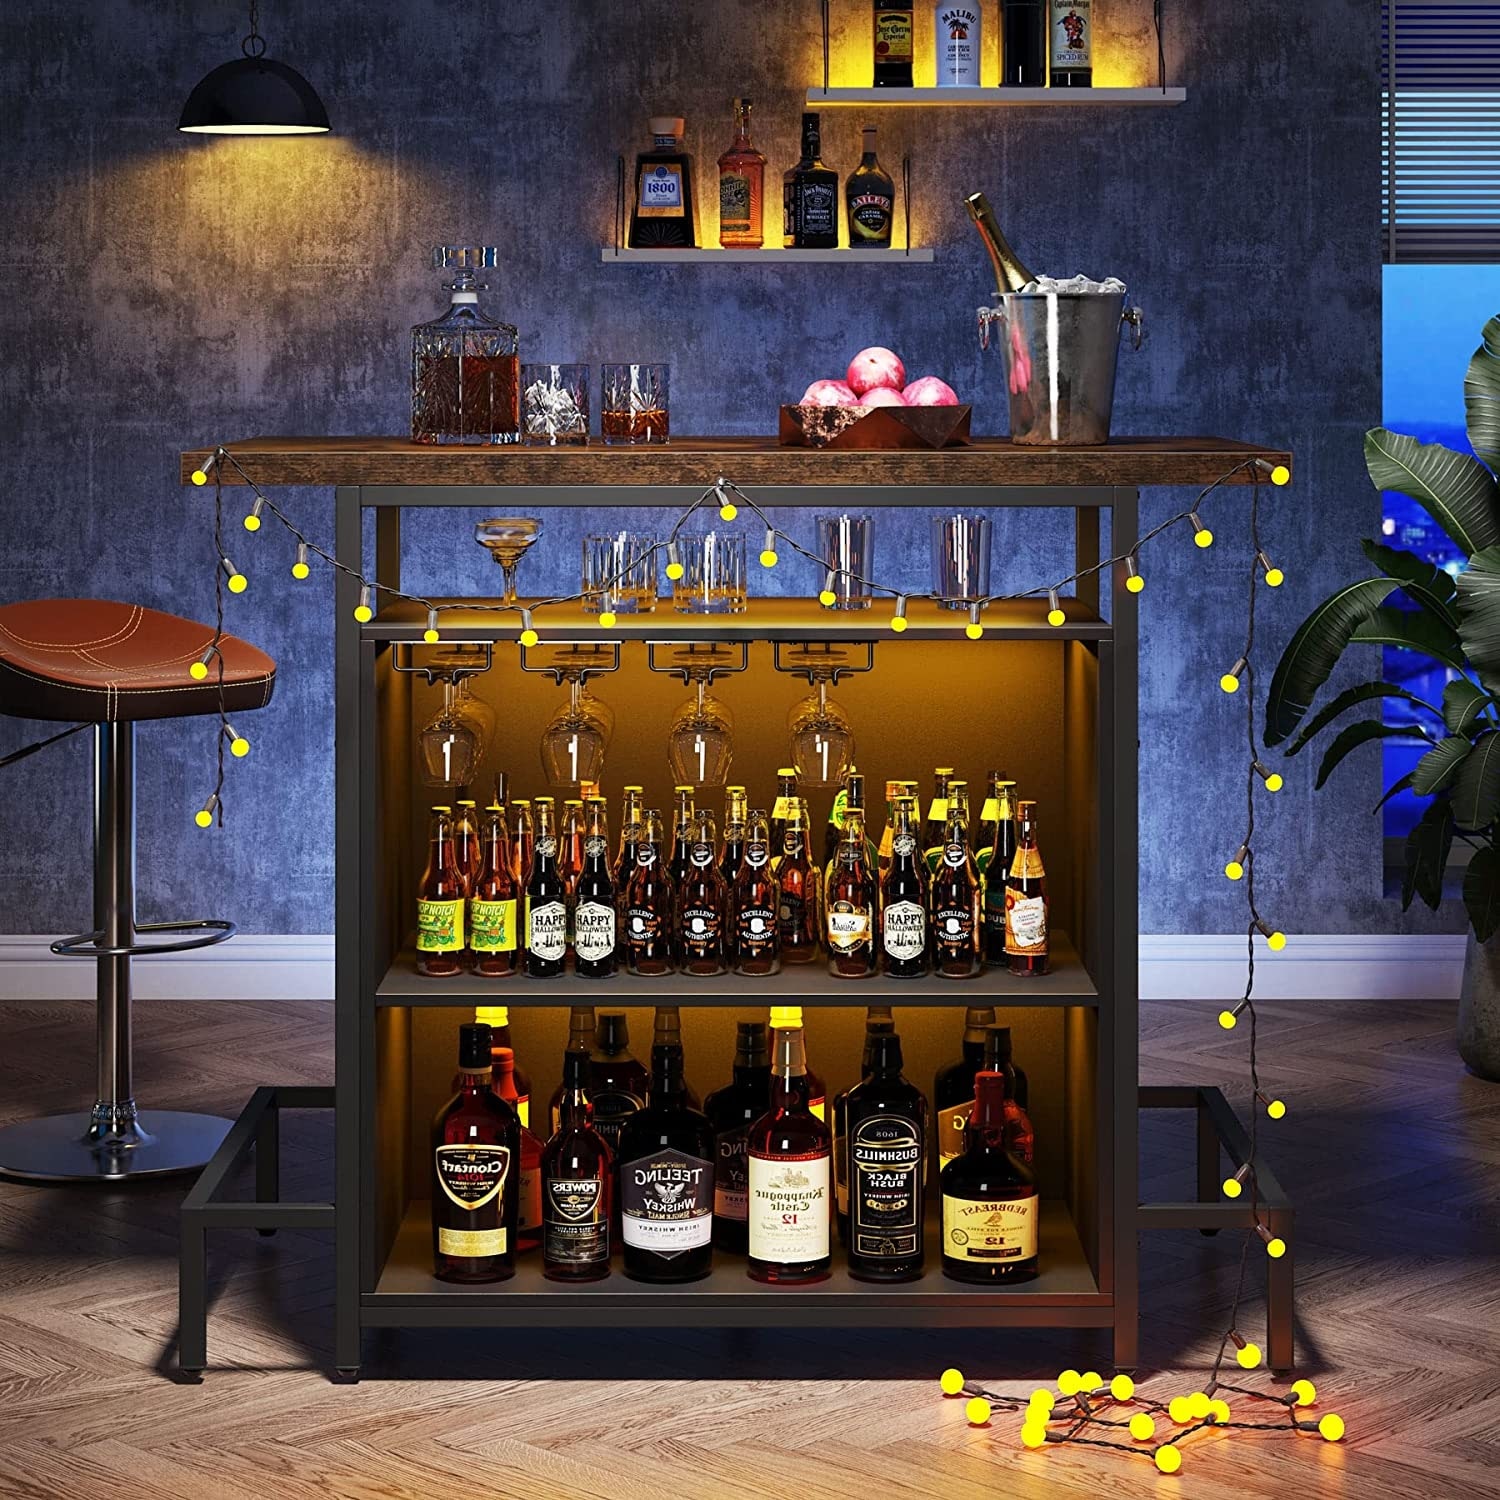 https://ak1.ostkcdn.com/images/products/is/images/direct/1ec275675eac0745be681954fefe60b6585450d3/Home-Bar-Unit-3-Tier-Liquor-Bar-Table-with-Glasses-Holder-Wine-Storage.jpg